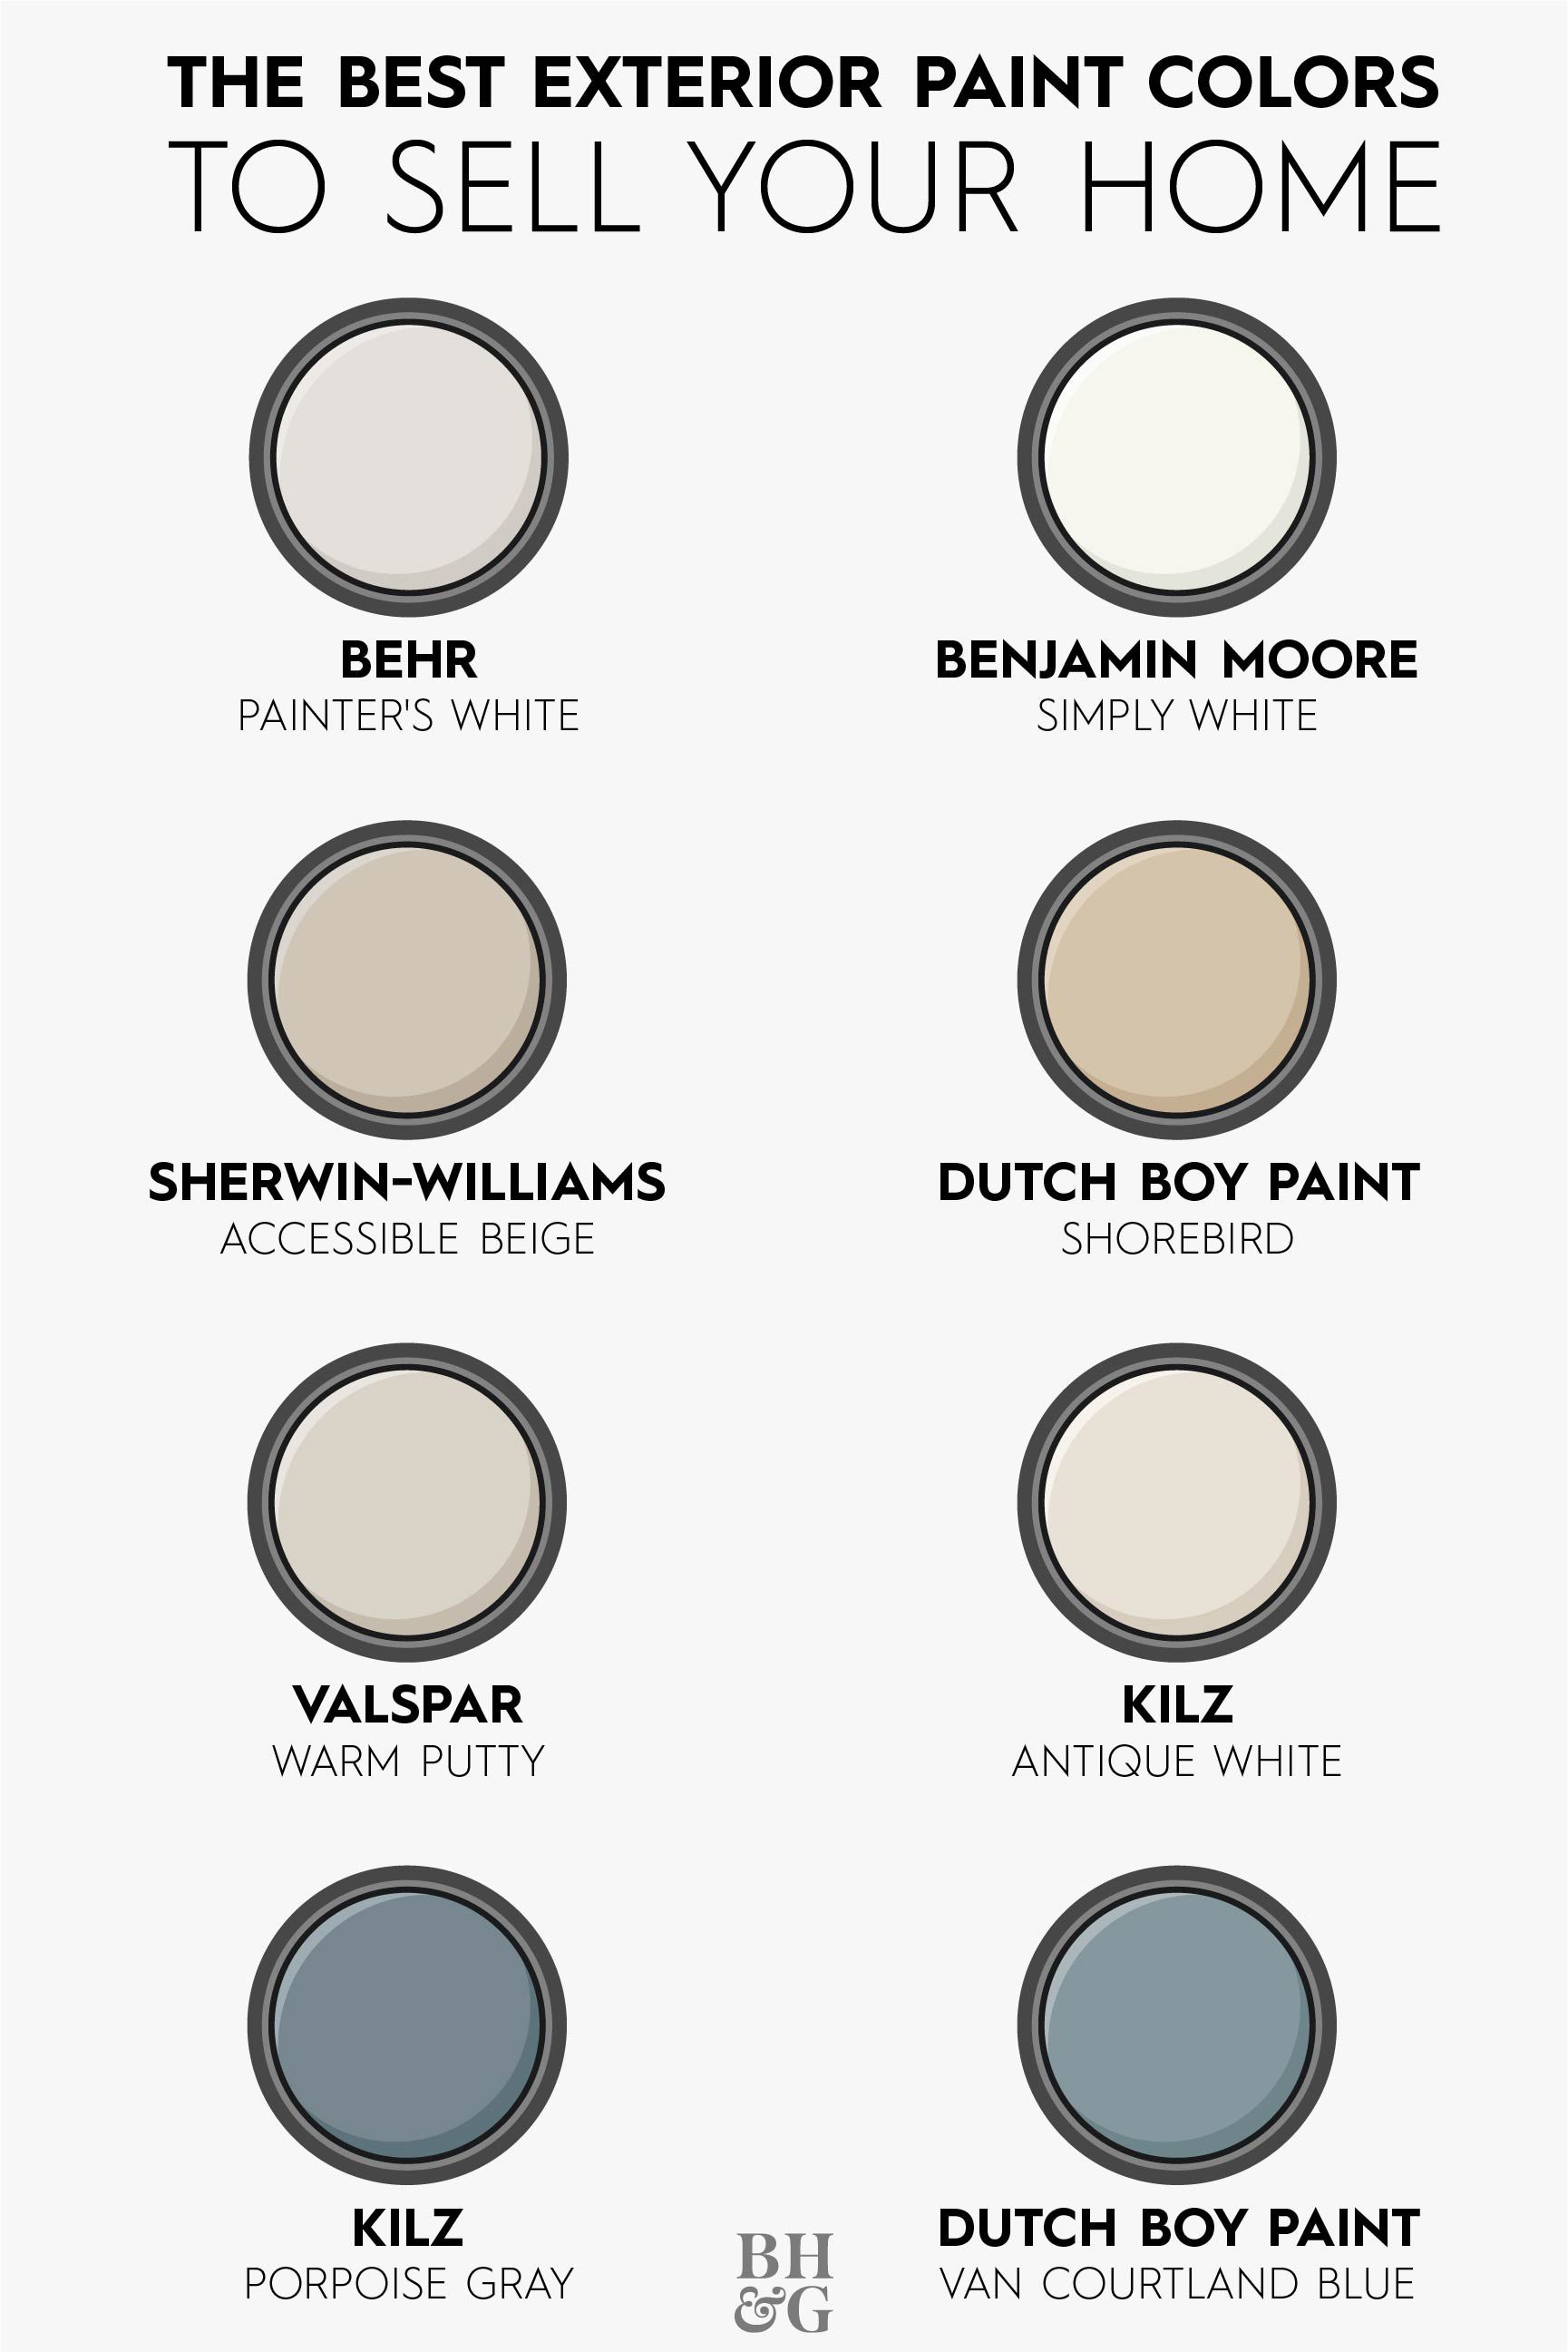 Paint colors for the exterior of a house – 10 ideas and expert real estate advice